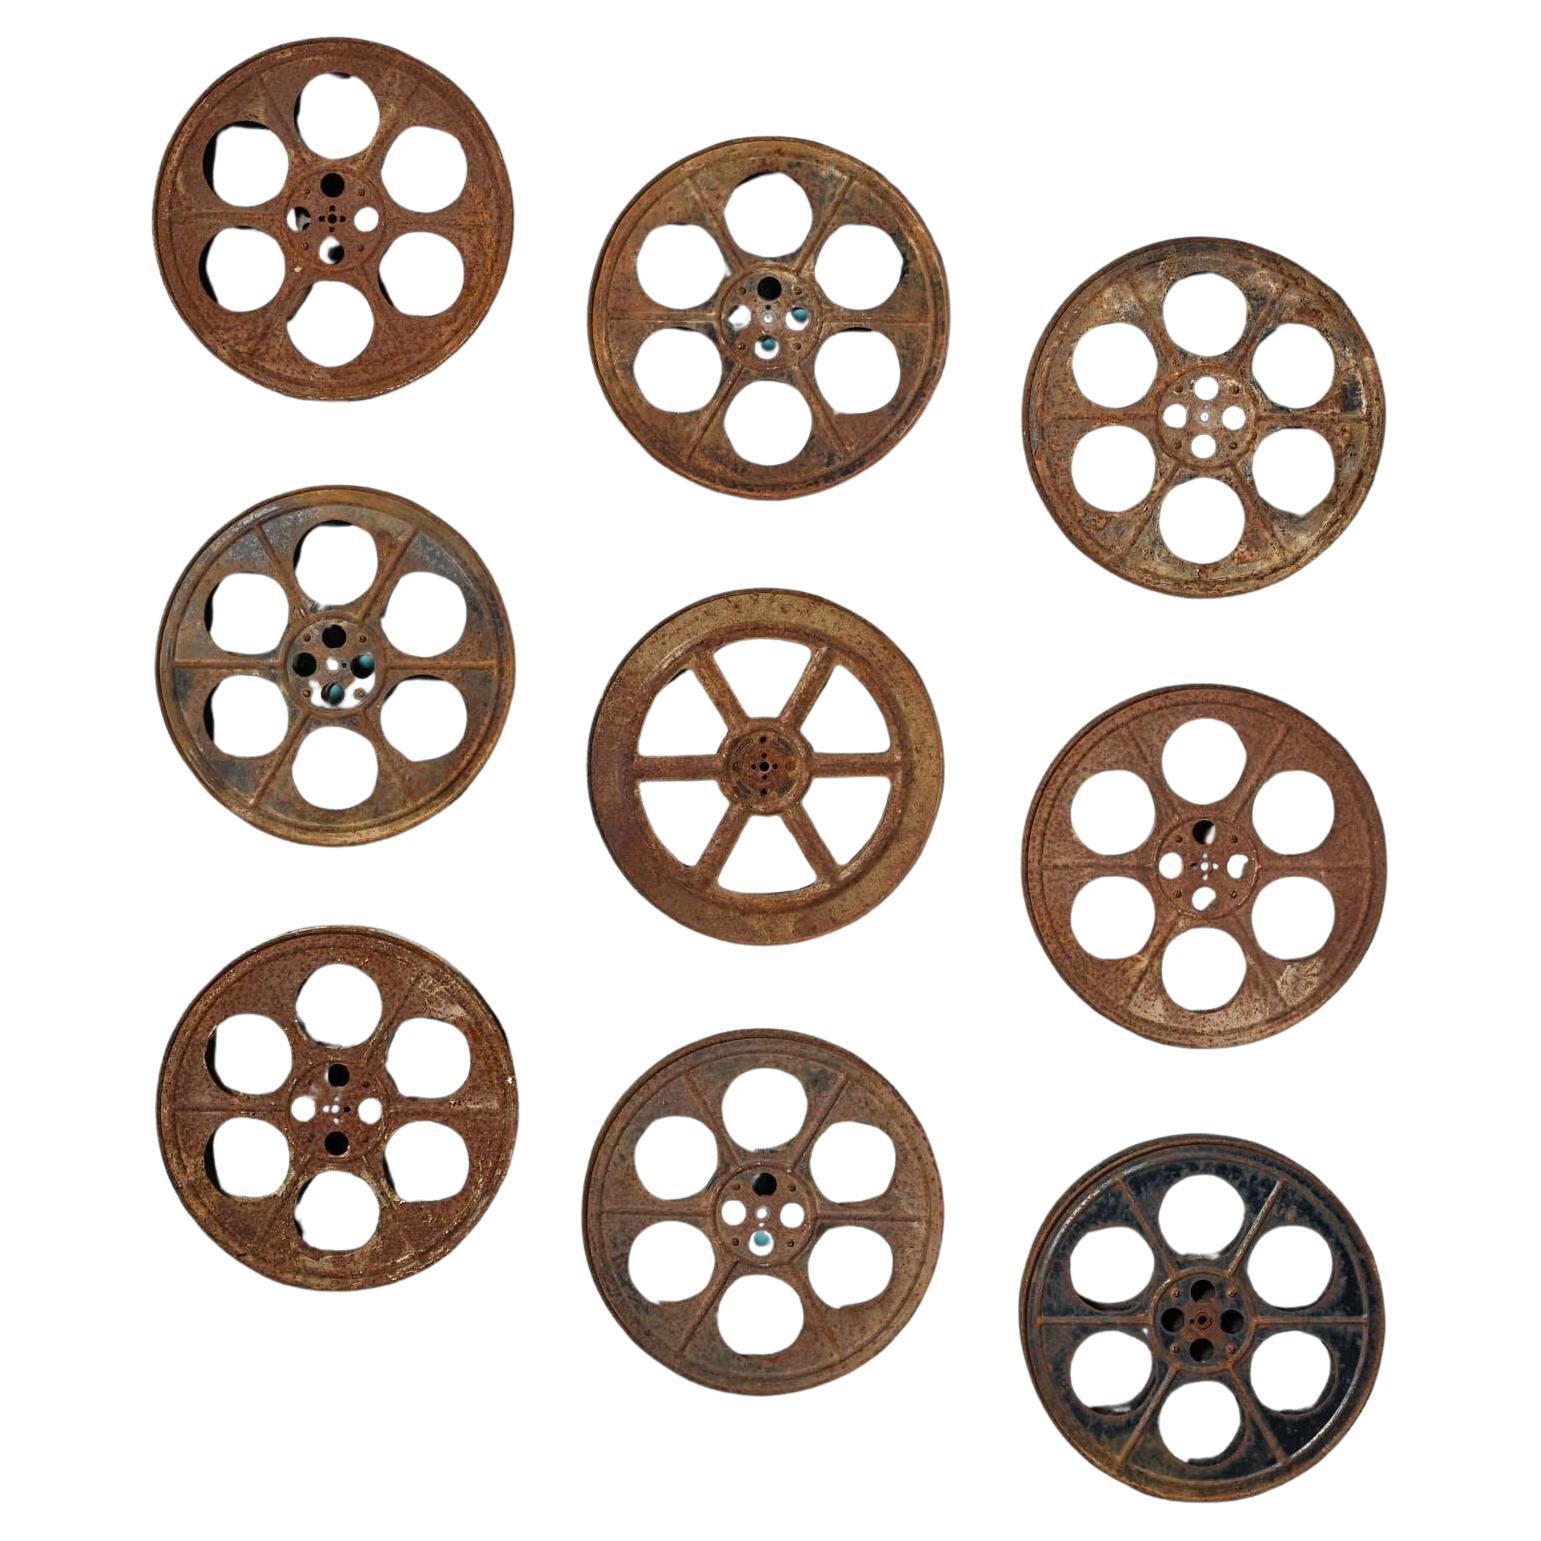 Collection of Vintage Movie Projection Reels or Spools